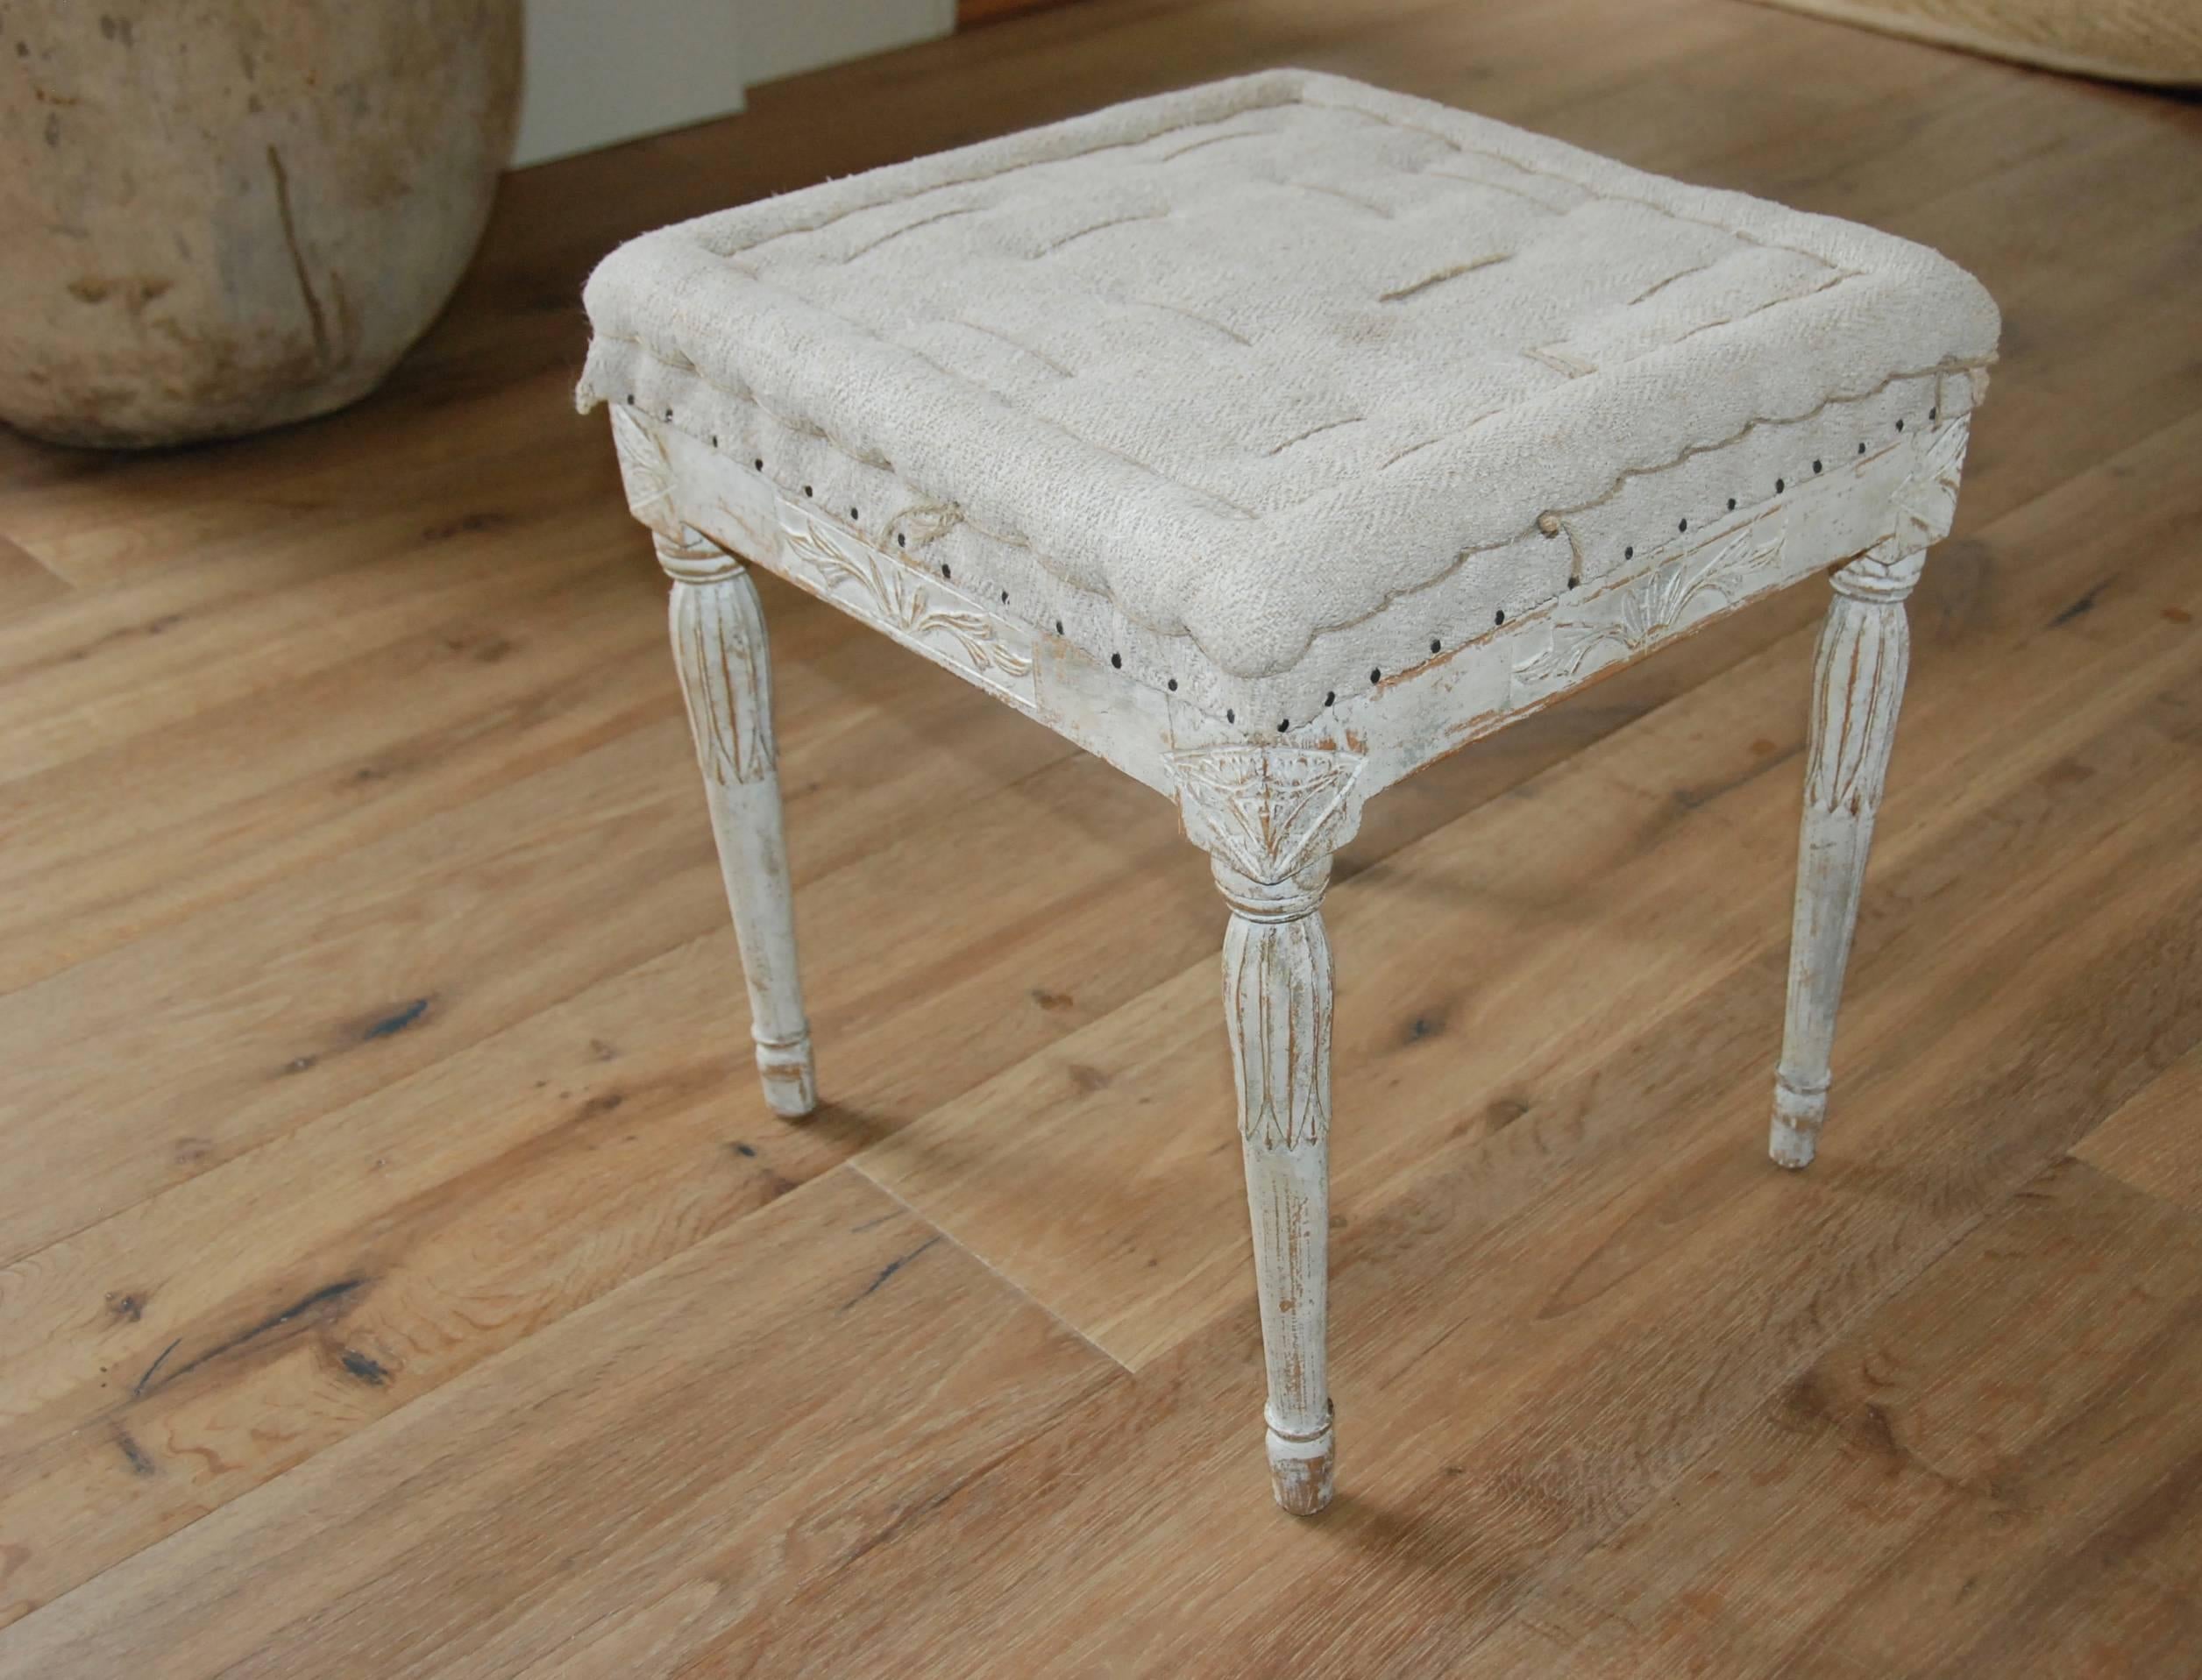 Signed Pair of Swedish Period Gustavian Stools In Excellent Condition For Sale In Encinitas, CA